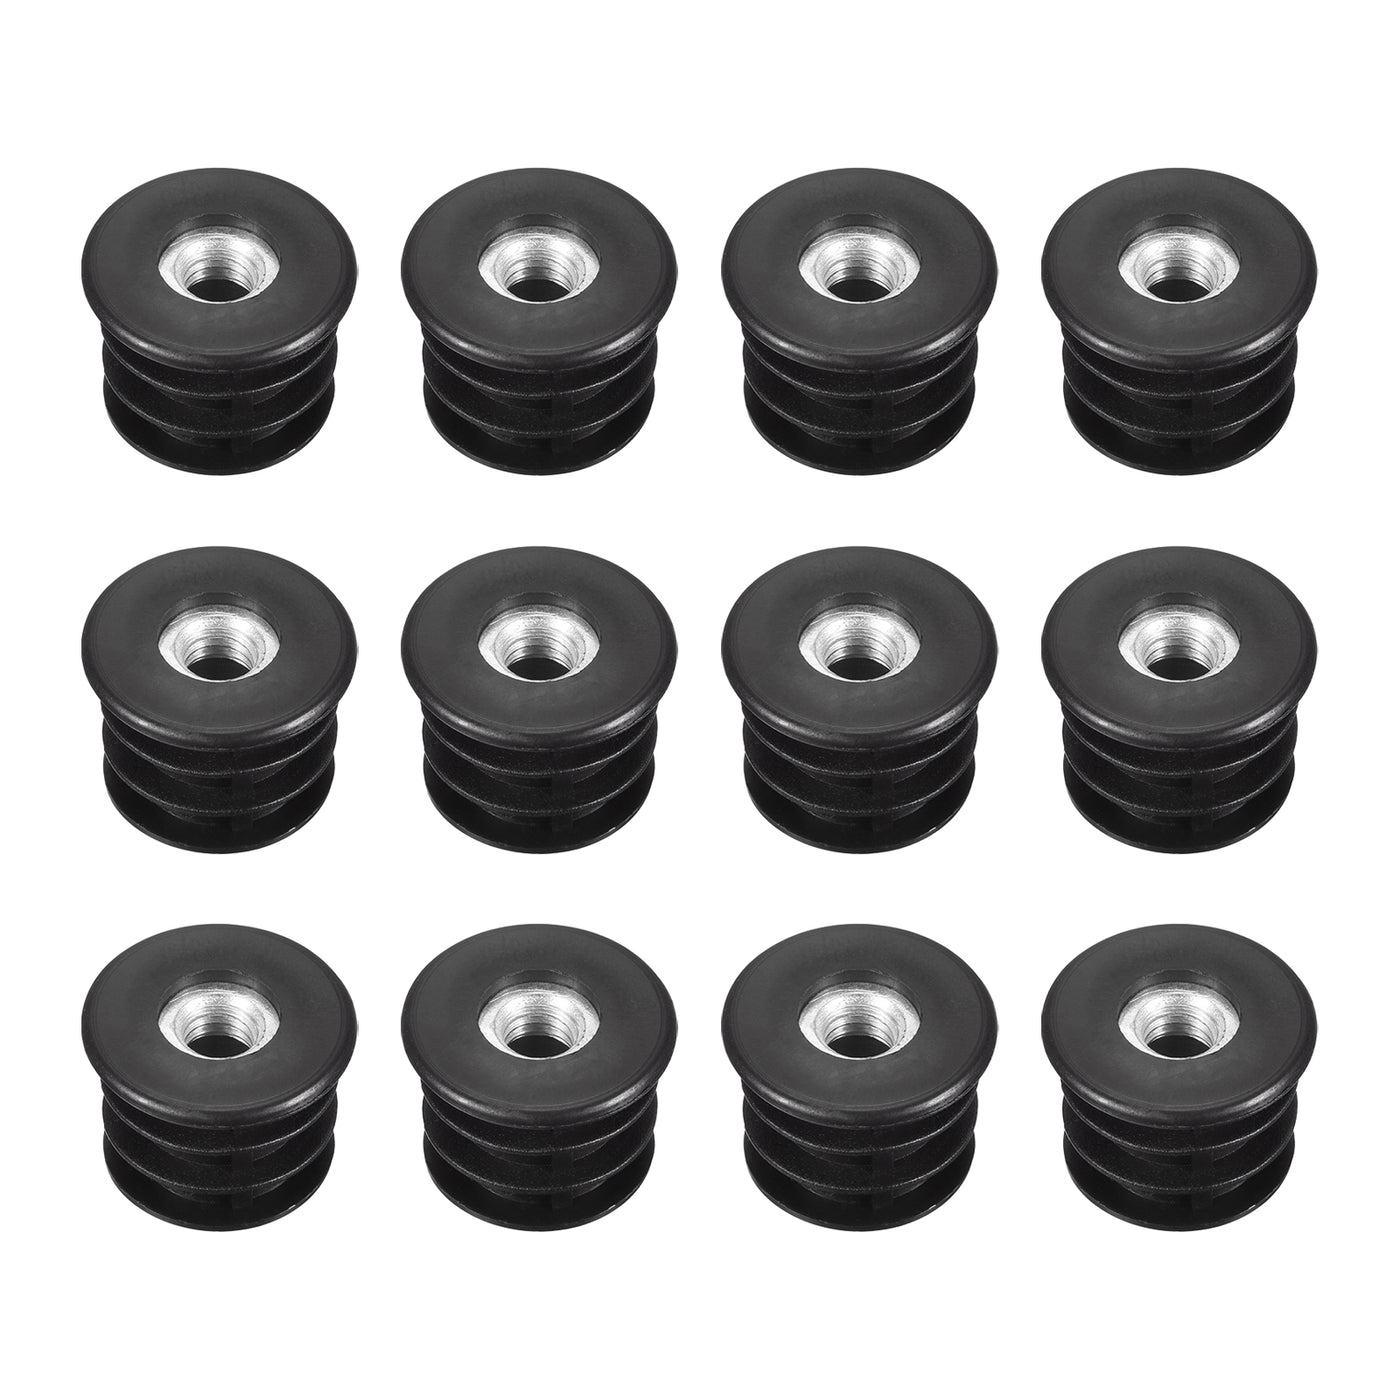 uxcell Uxcell 12Pcs Caster Insert with Thread, 25mm/0.98" M8 Thread for Furniture